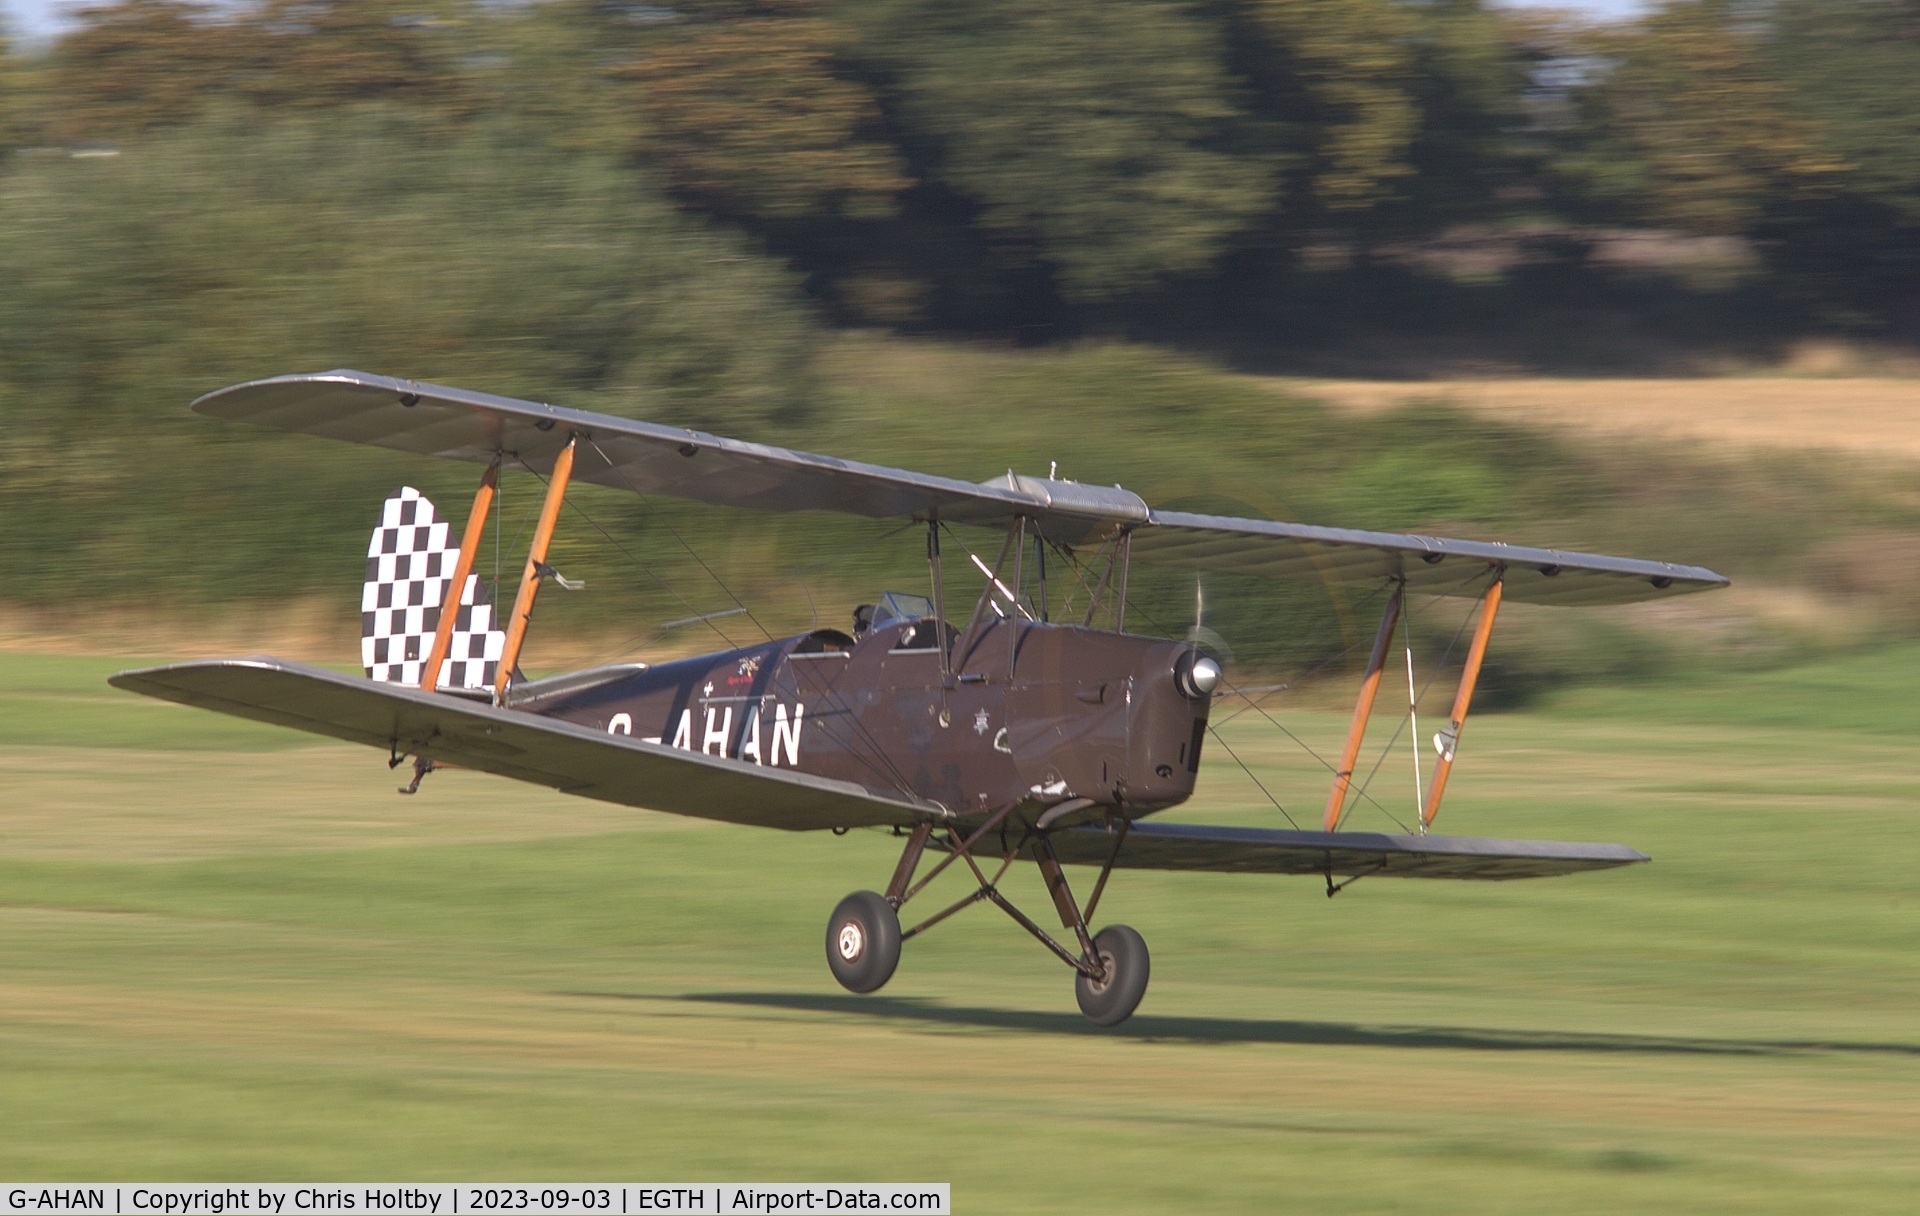 G-AHAN, 1944 De Havilland DH-82A Tiger Moth II C/N 86553, Bit of a bumpy landing at Old Warden during the Vintage Airshow 2023